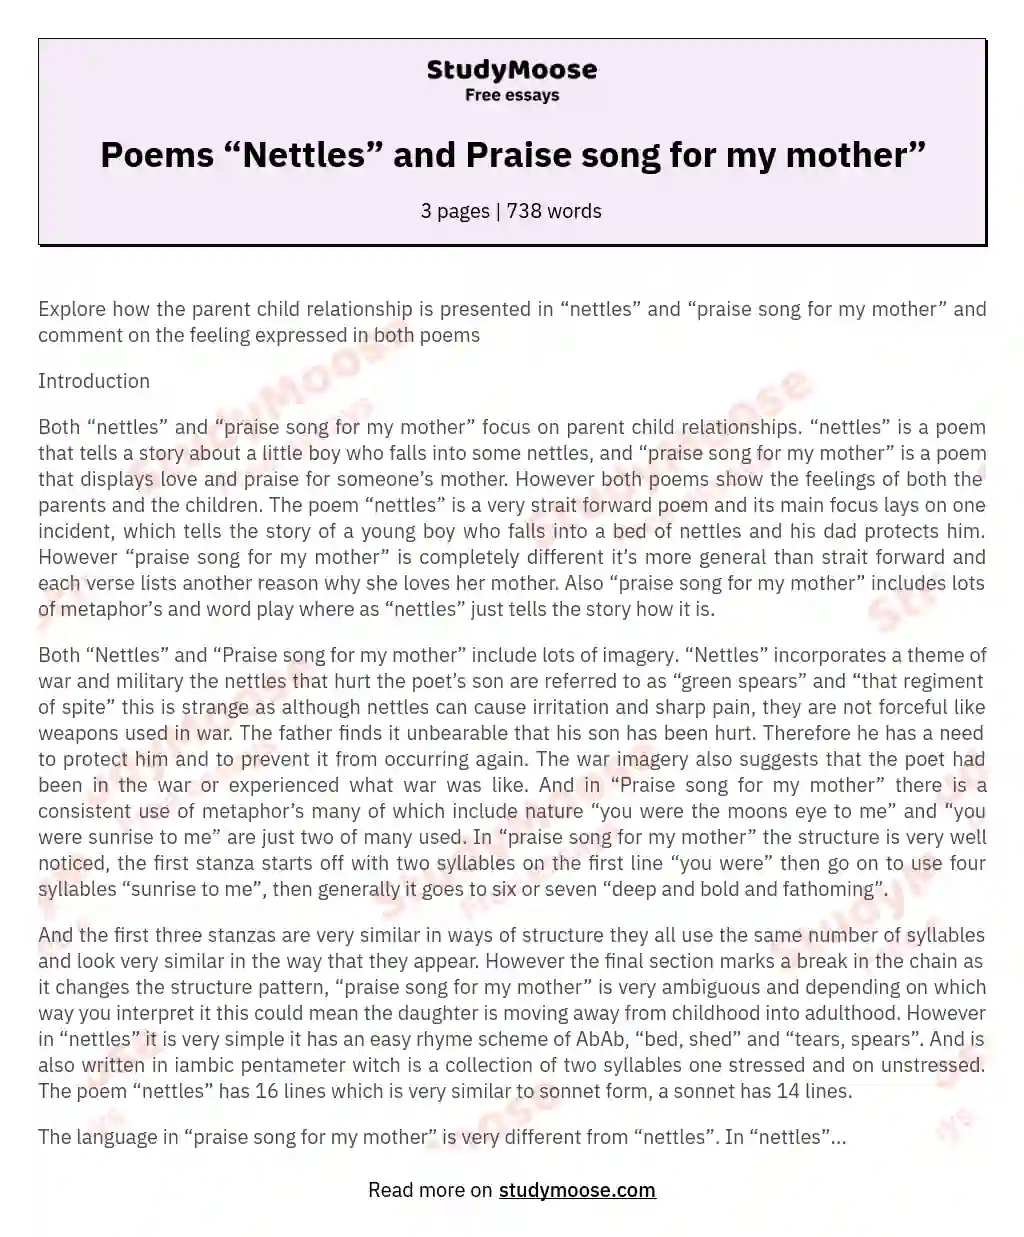 Poems “Nettles” and Praise song for my mother” essay